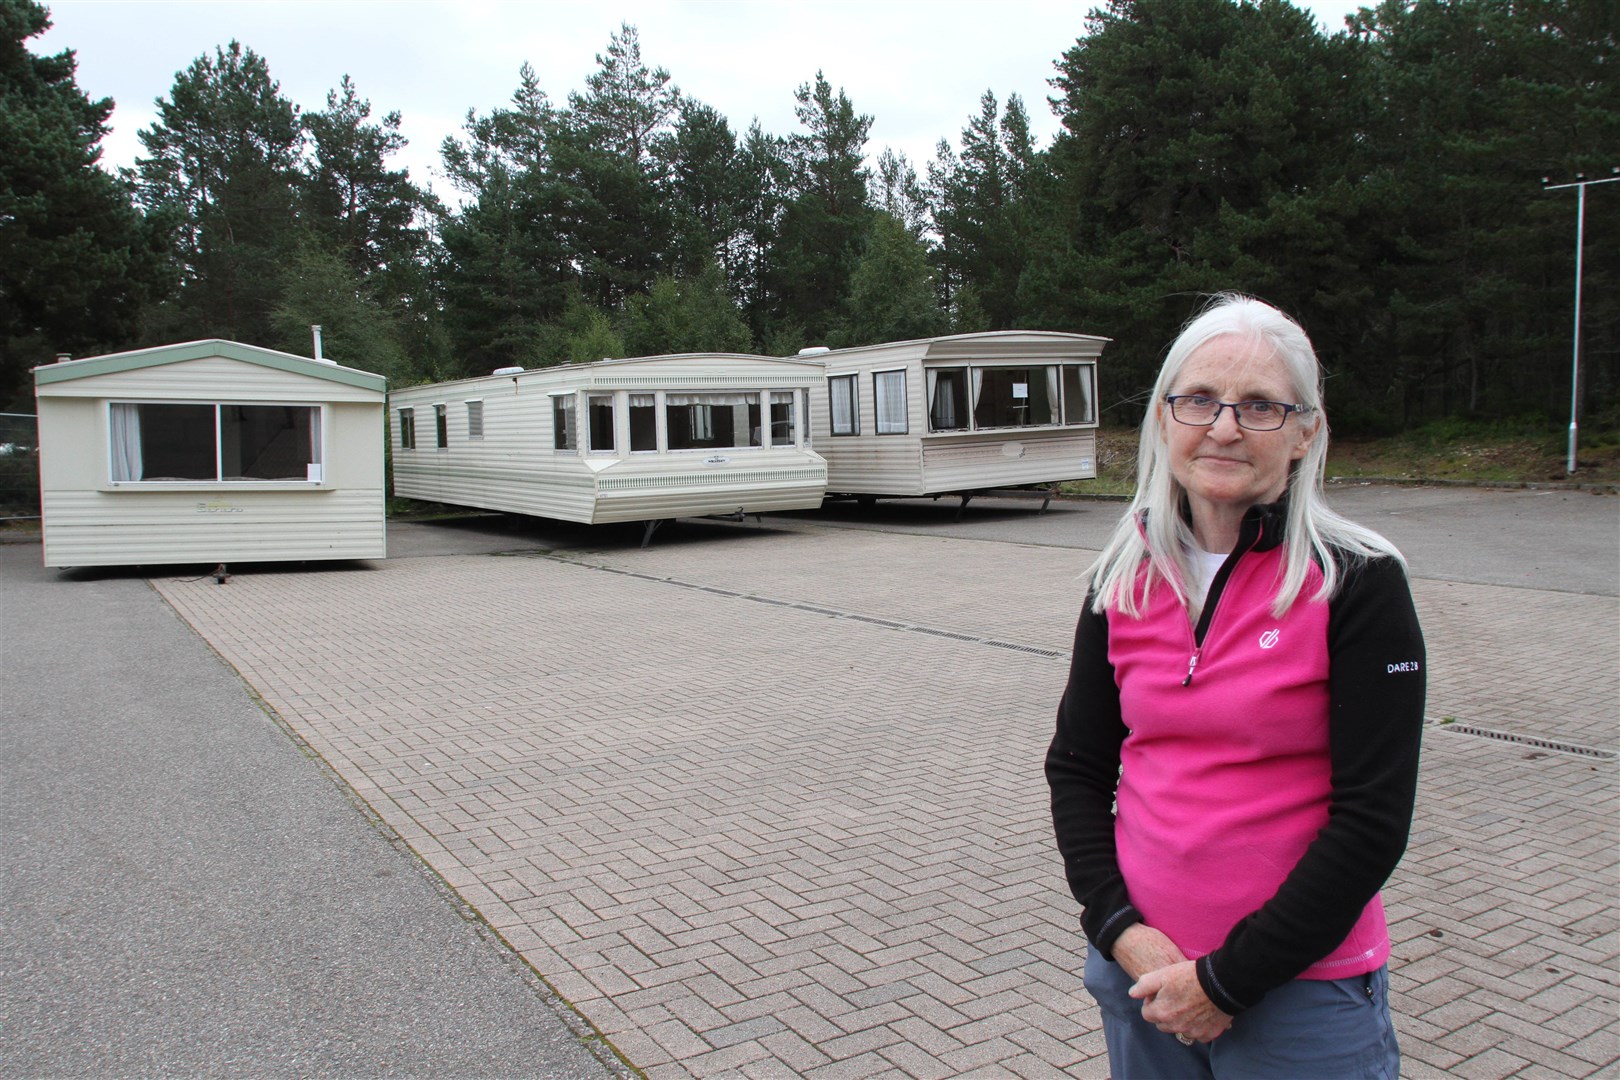 Badenoch and Strathspey Highland councillor Muriel Cockburn by the caravans on site at the Coylumbridge Hotel.